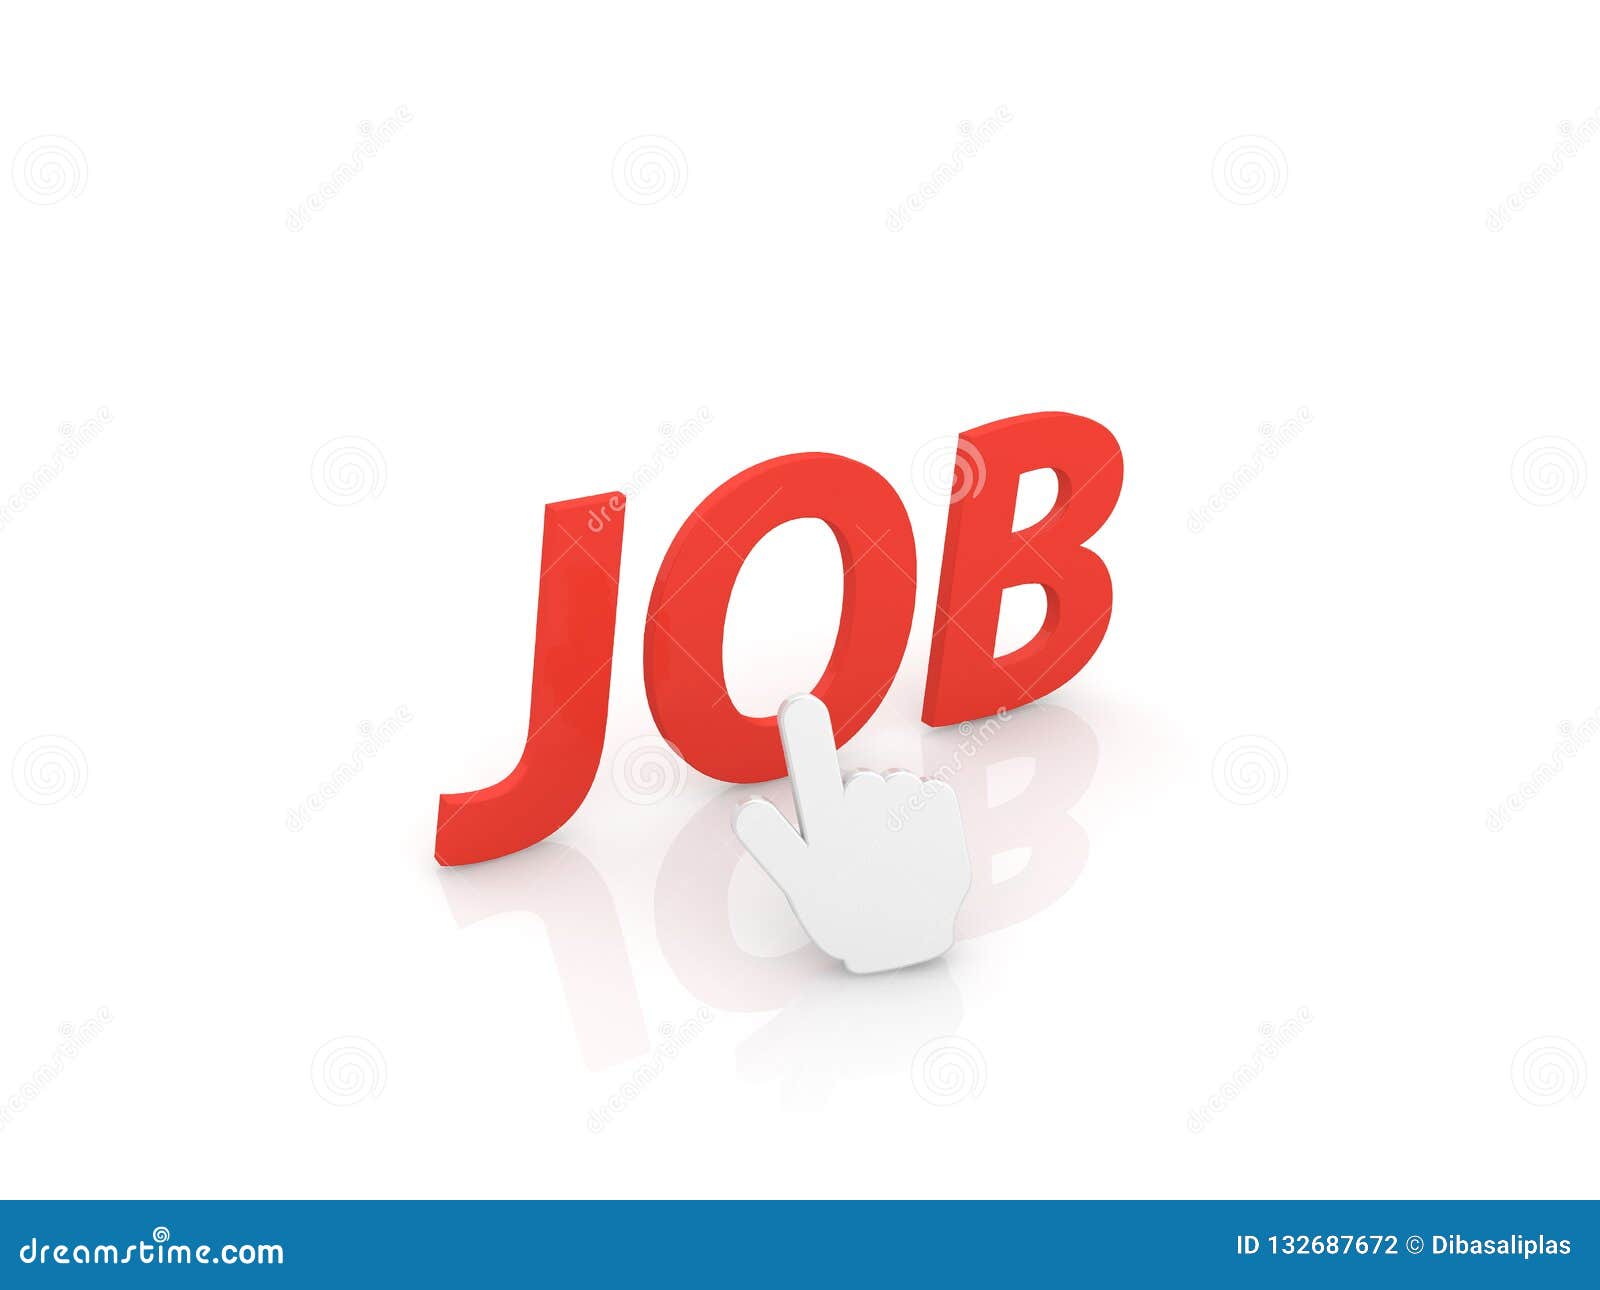 the computer cursor points to the word - job.